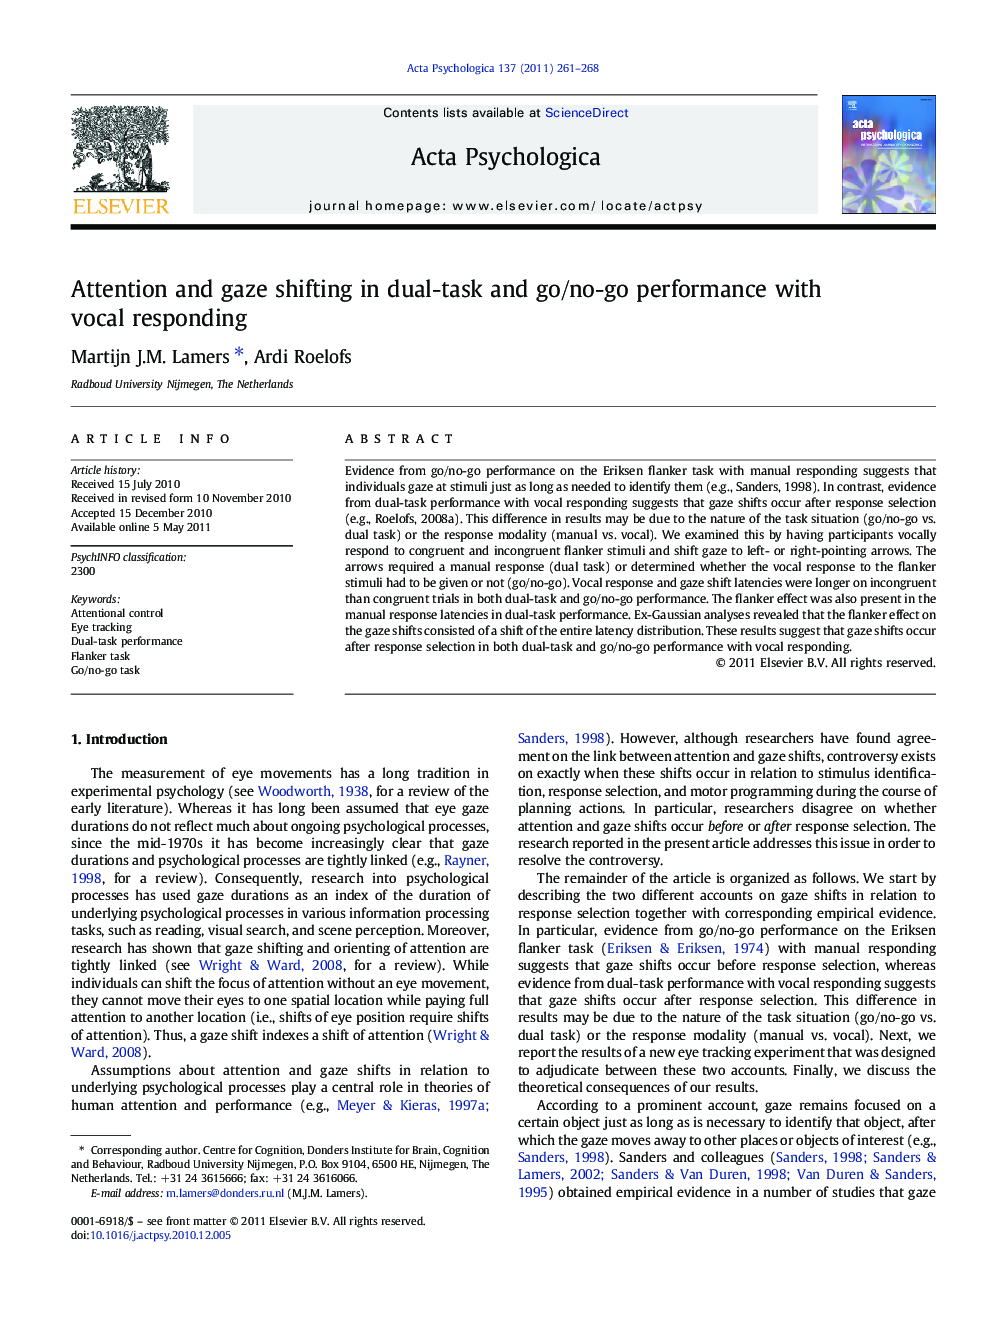 Attention and gaze shifting in dual-task and go/no-go performance with vocal responding